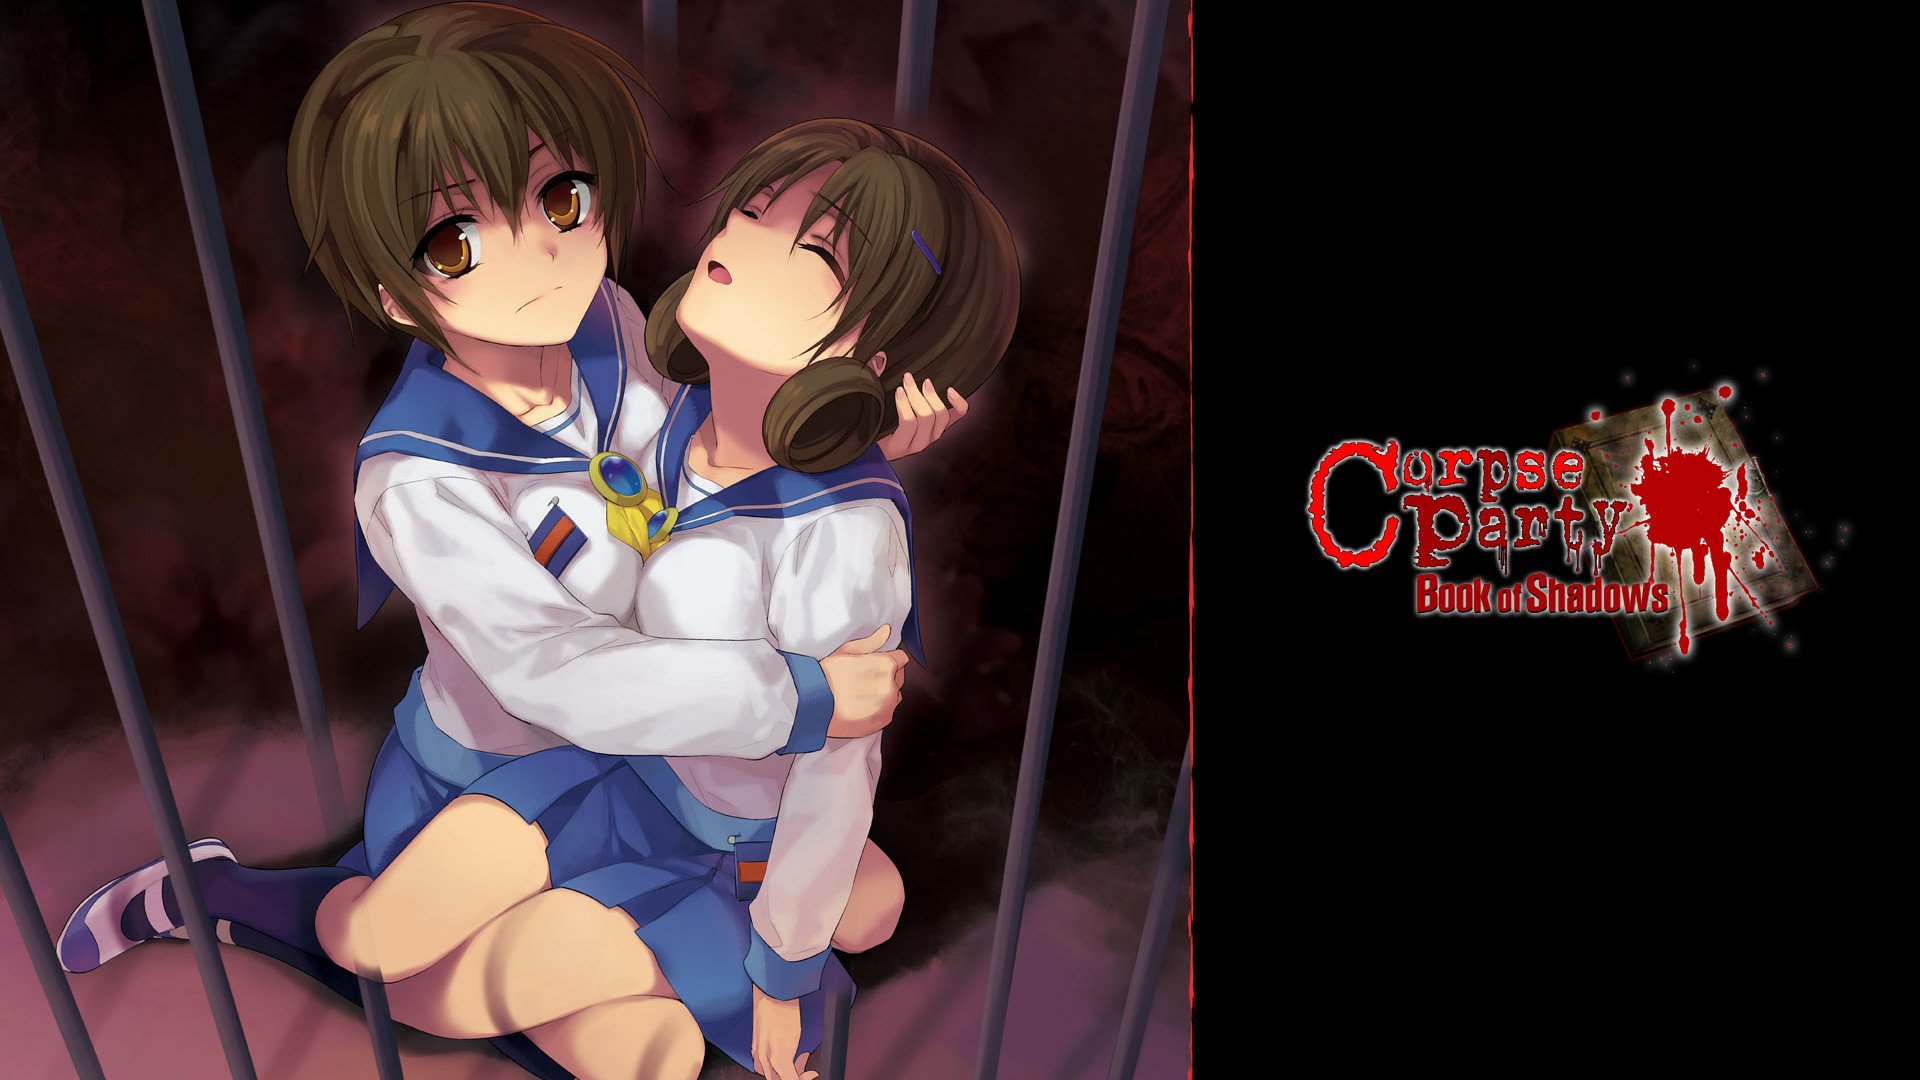 corpse party anime sub